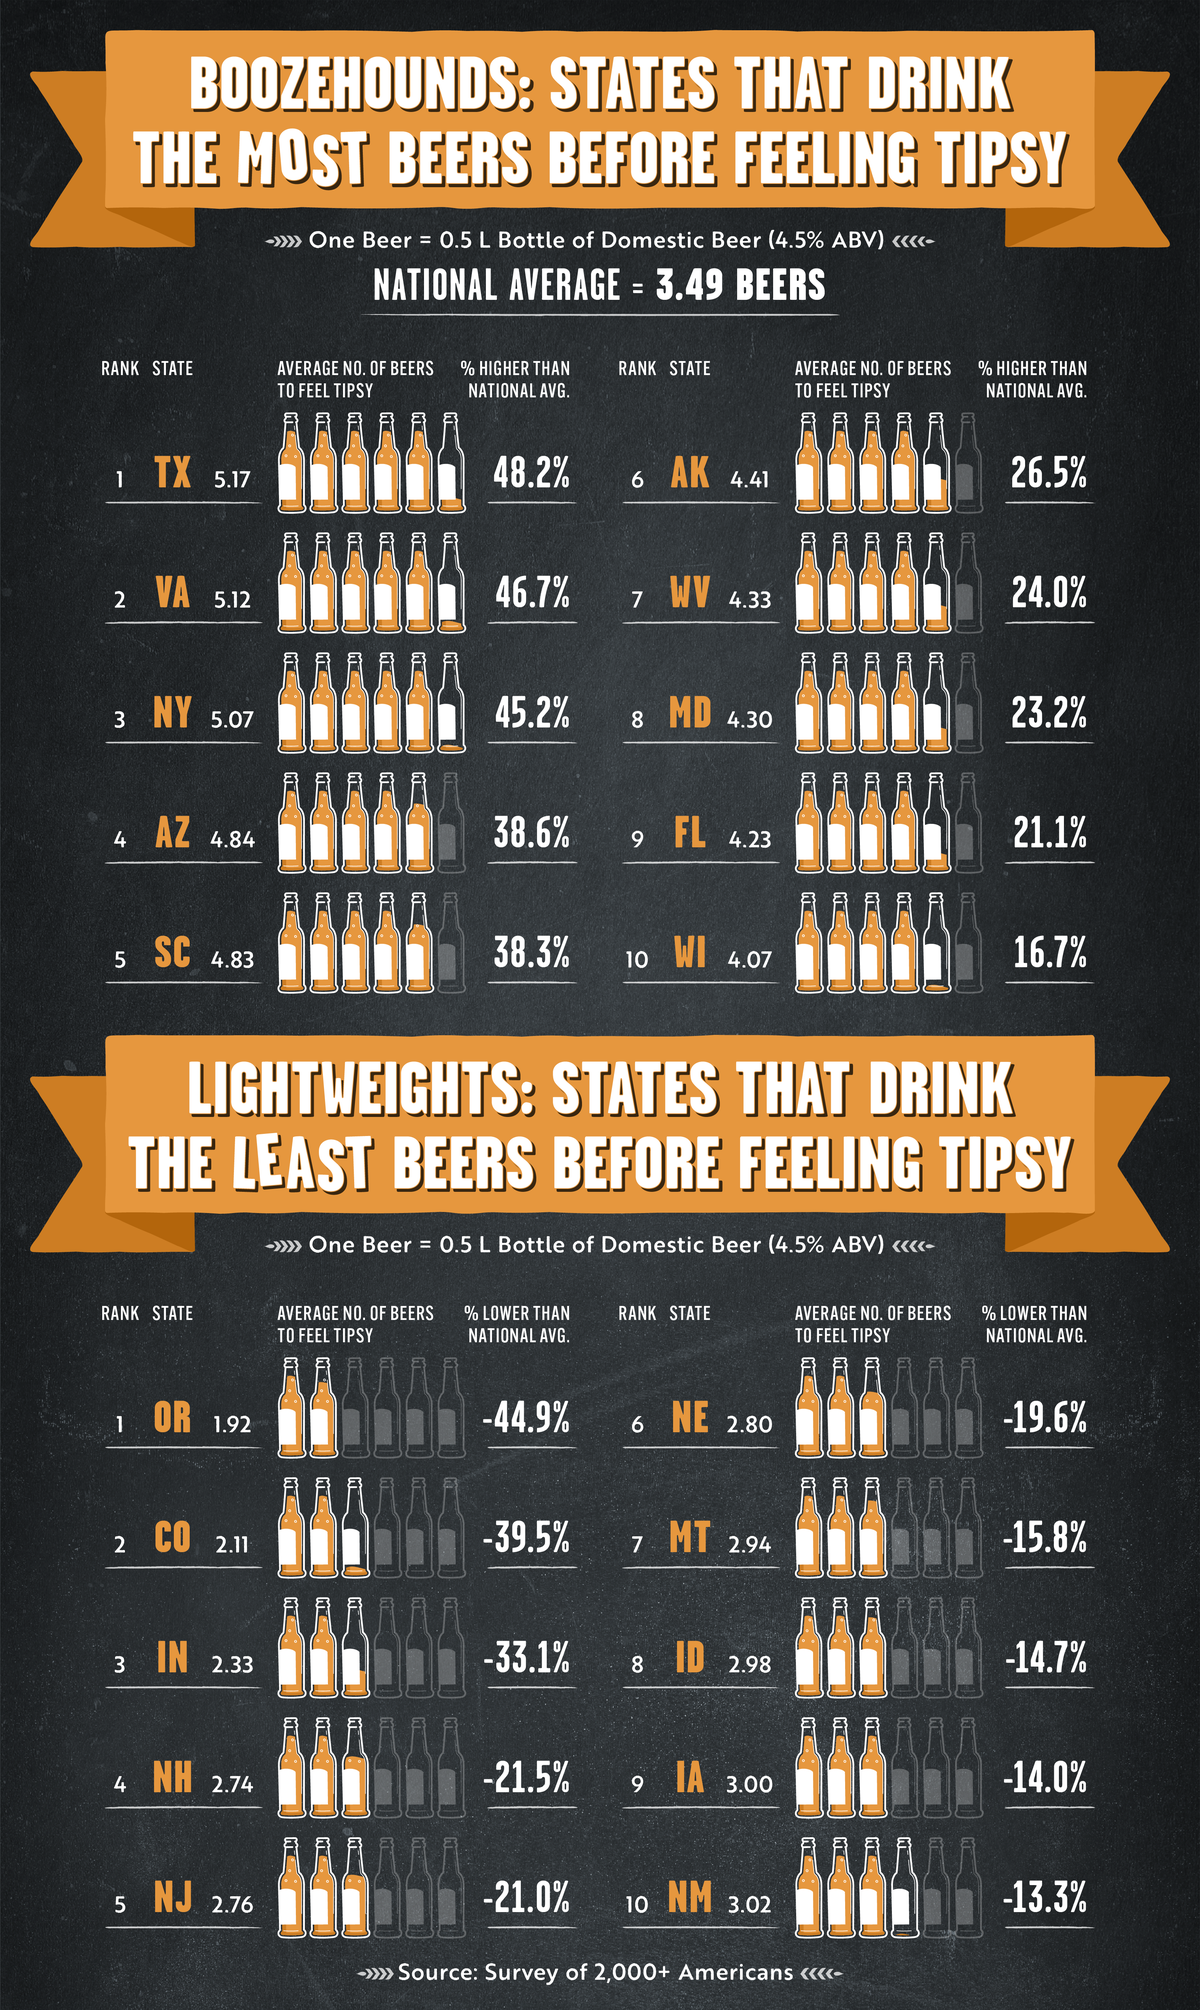 States that drink the most beers before feeling tipsy